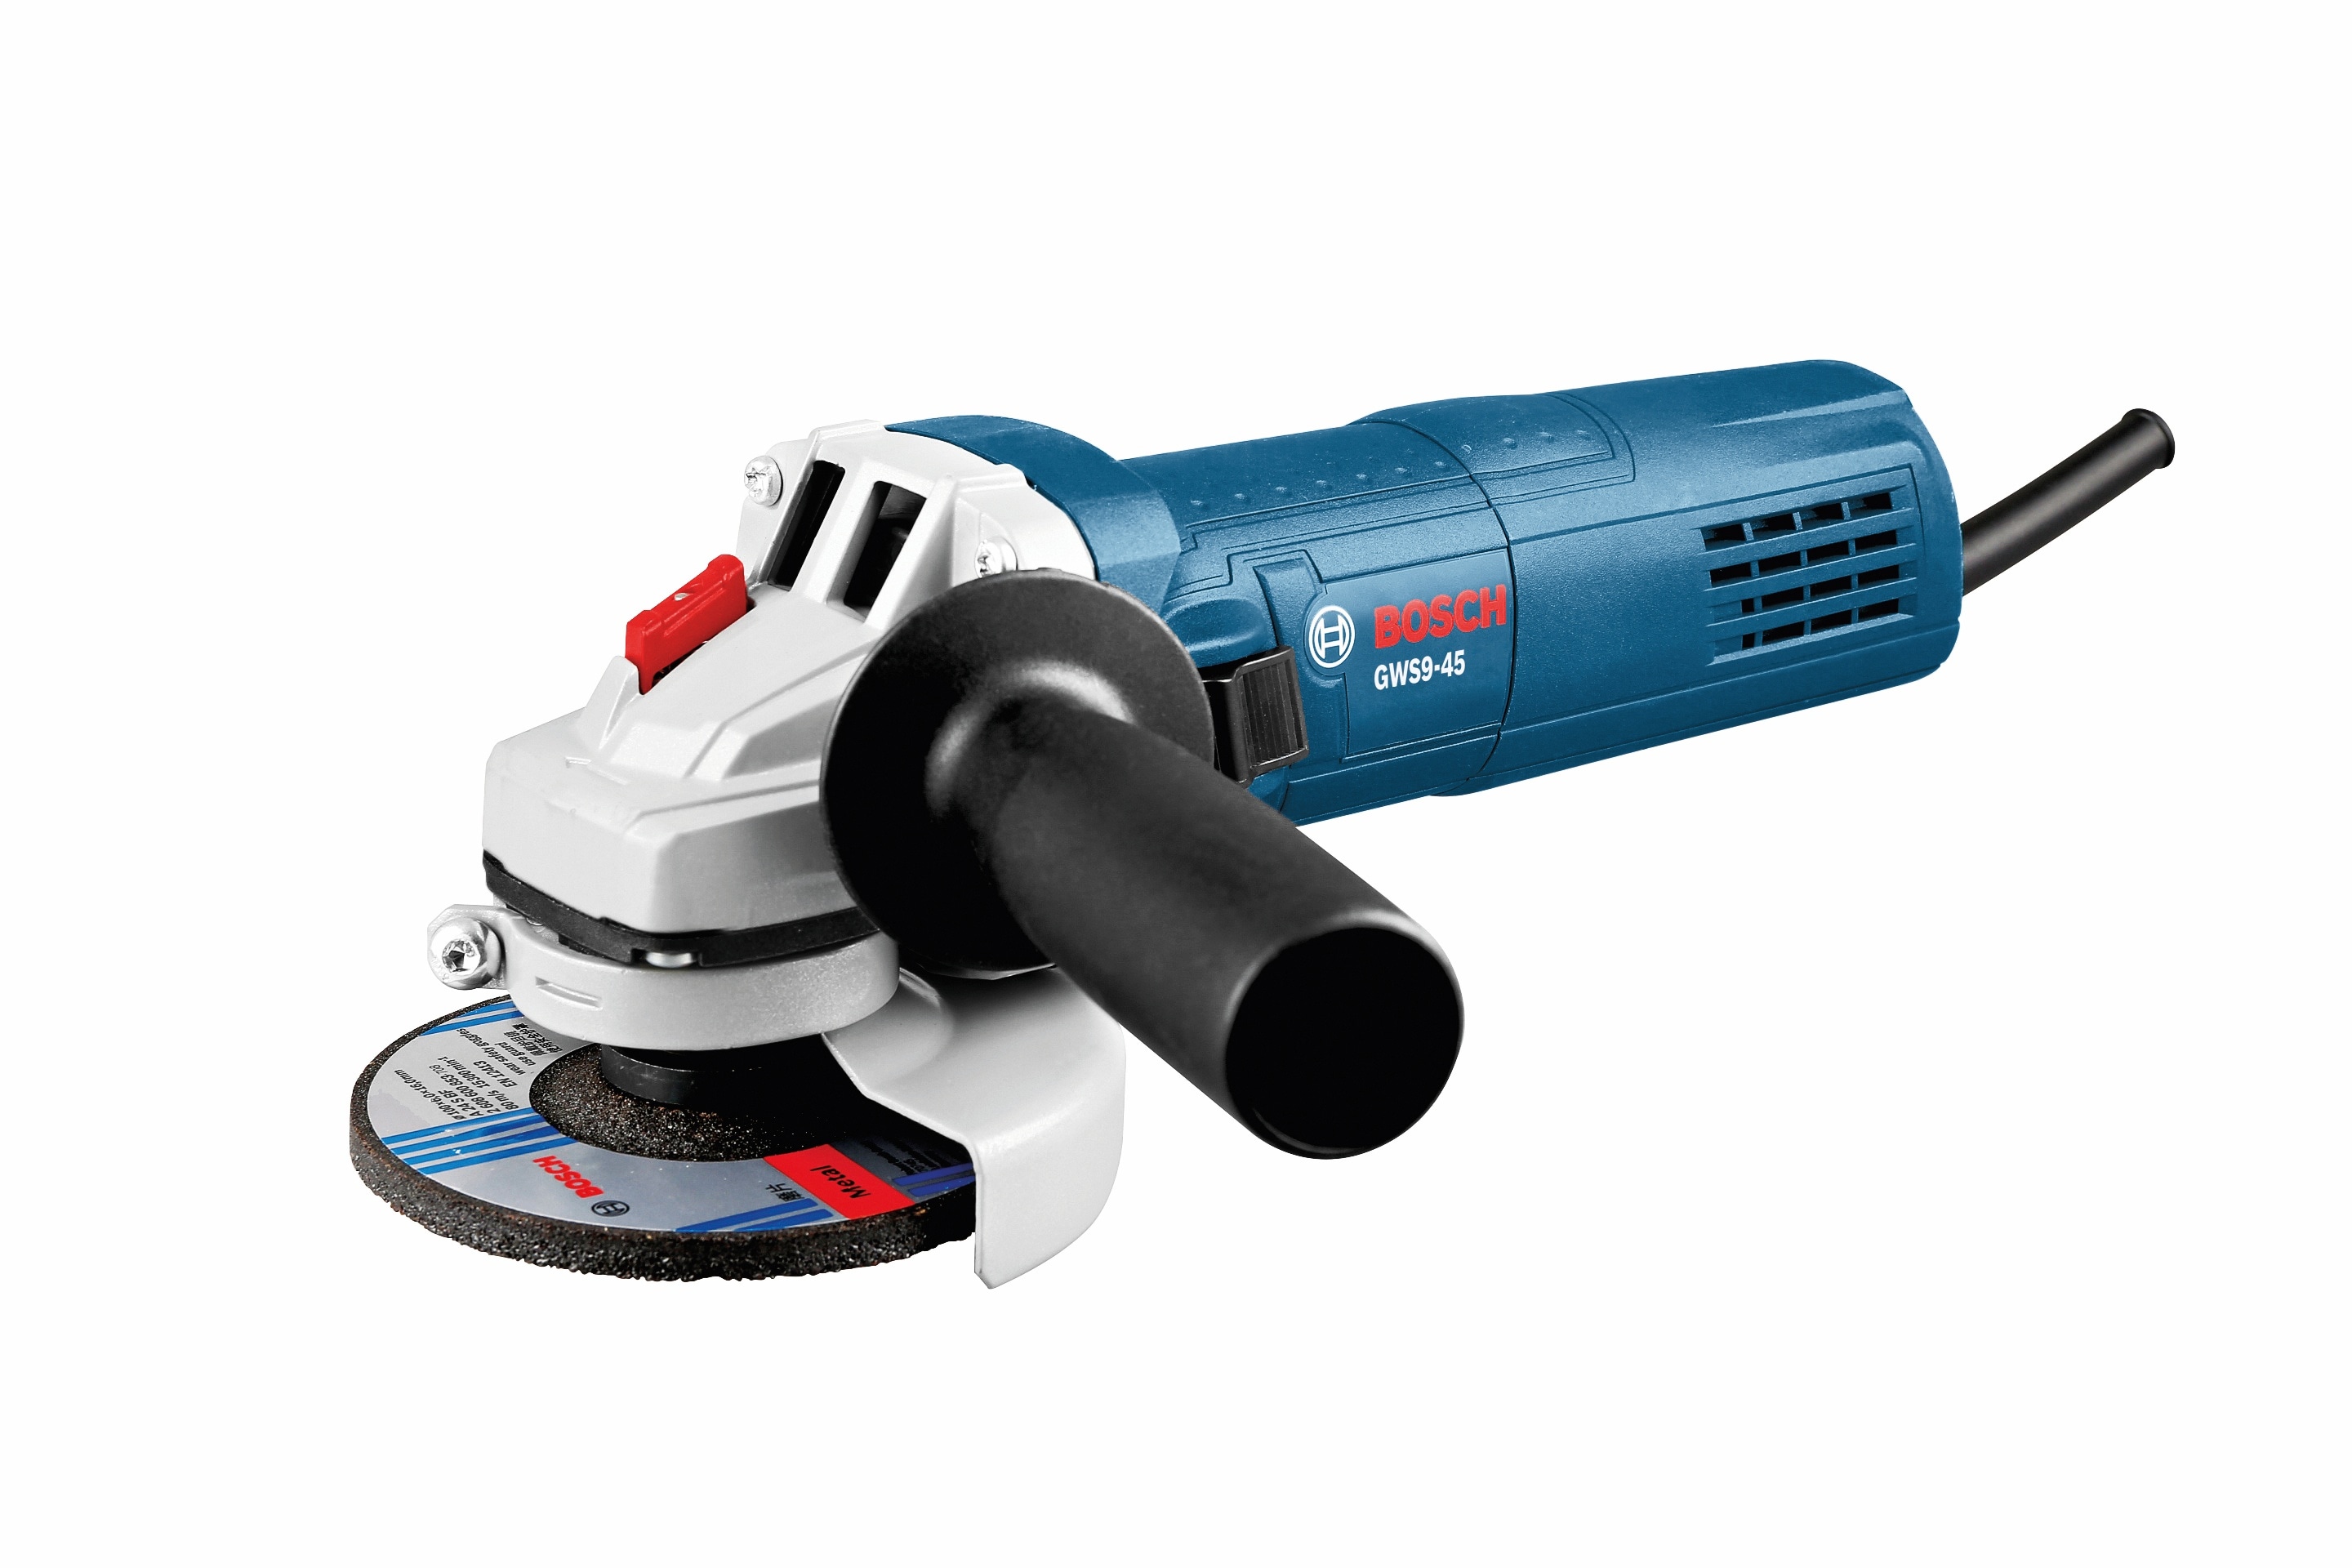 Electric Angle Grinder 13000 RPM Variable Speed 880W Copper Motor Grinding  machine Material Removal Cut-Off Power Tools